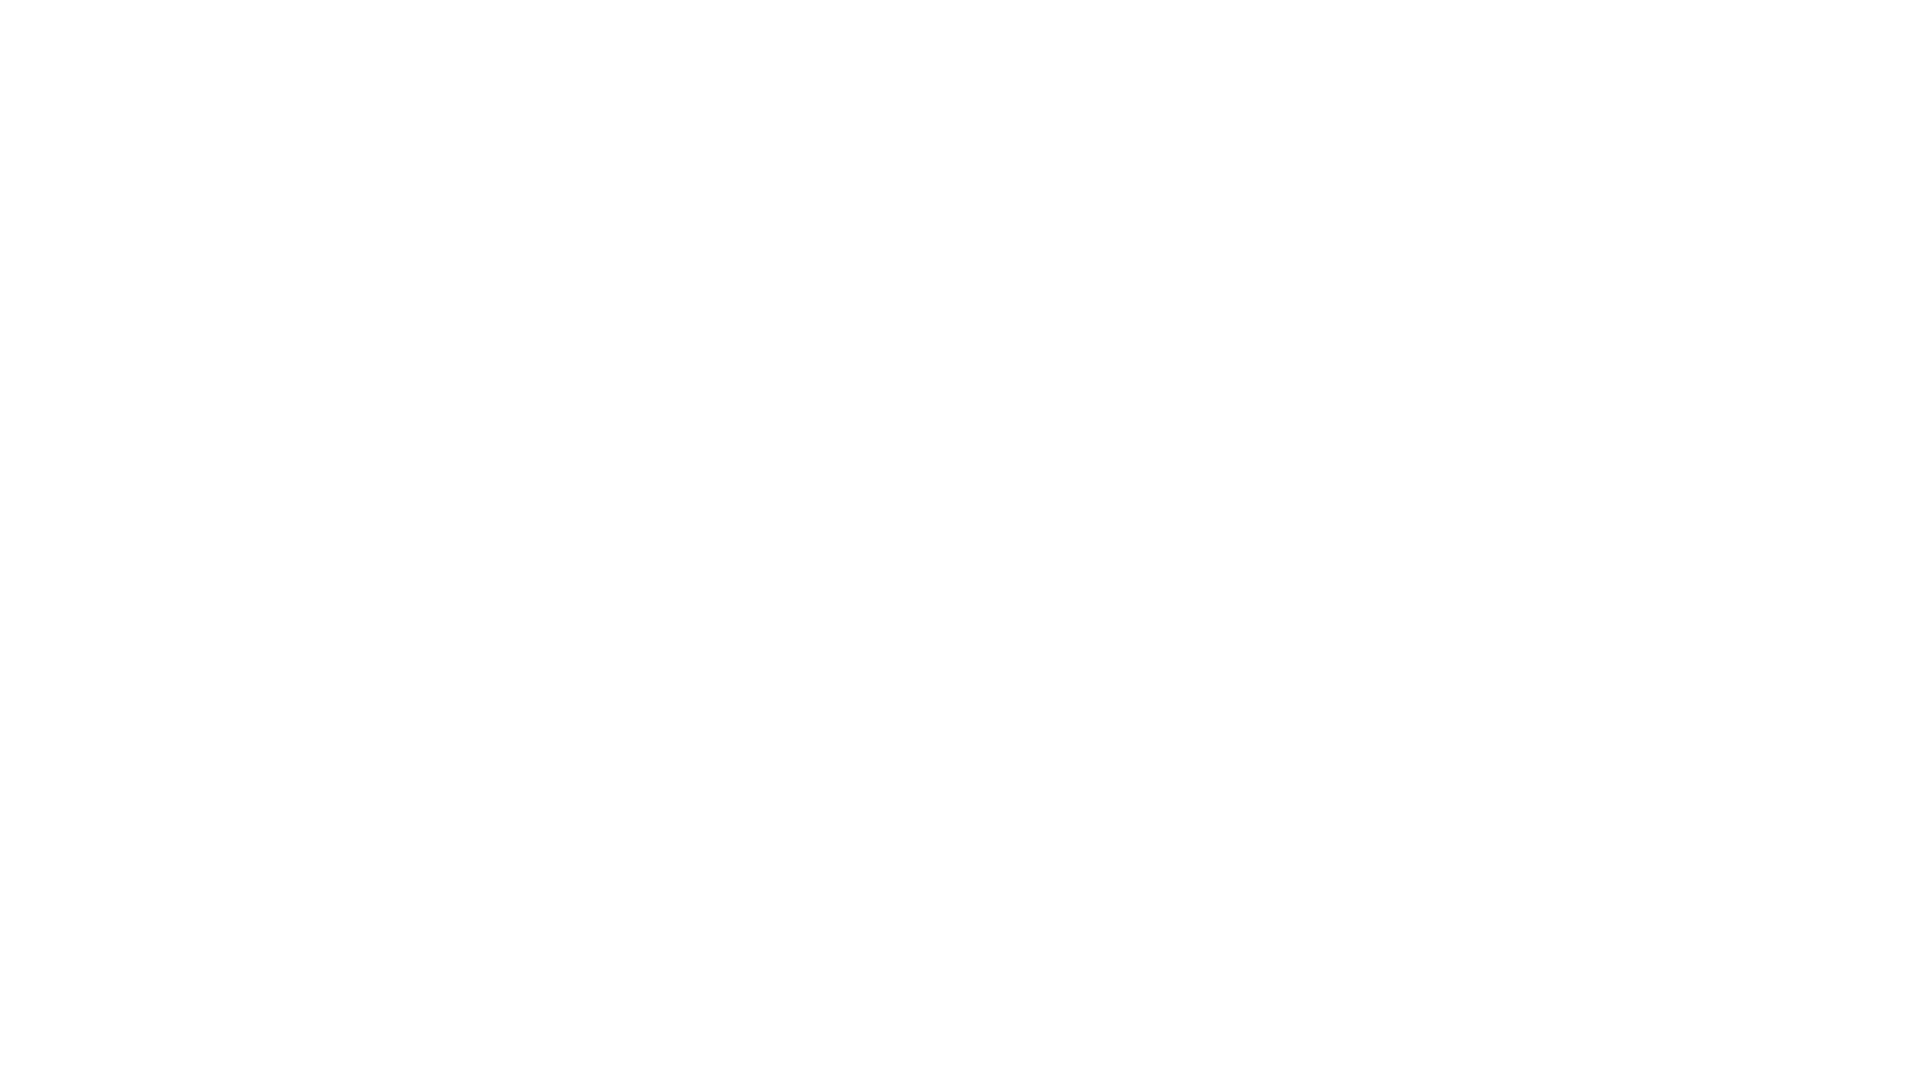 Become a means of communicating